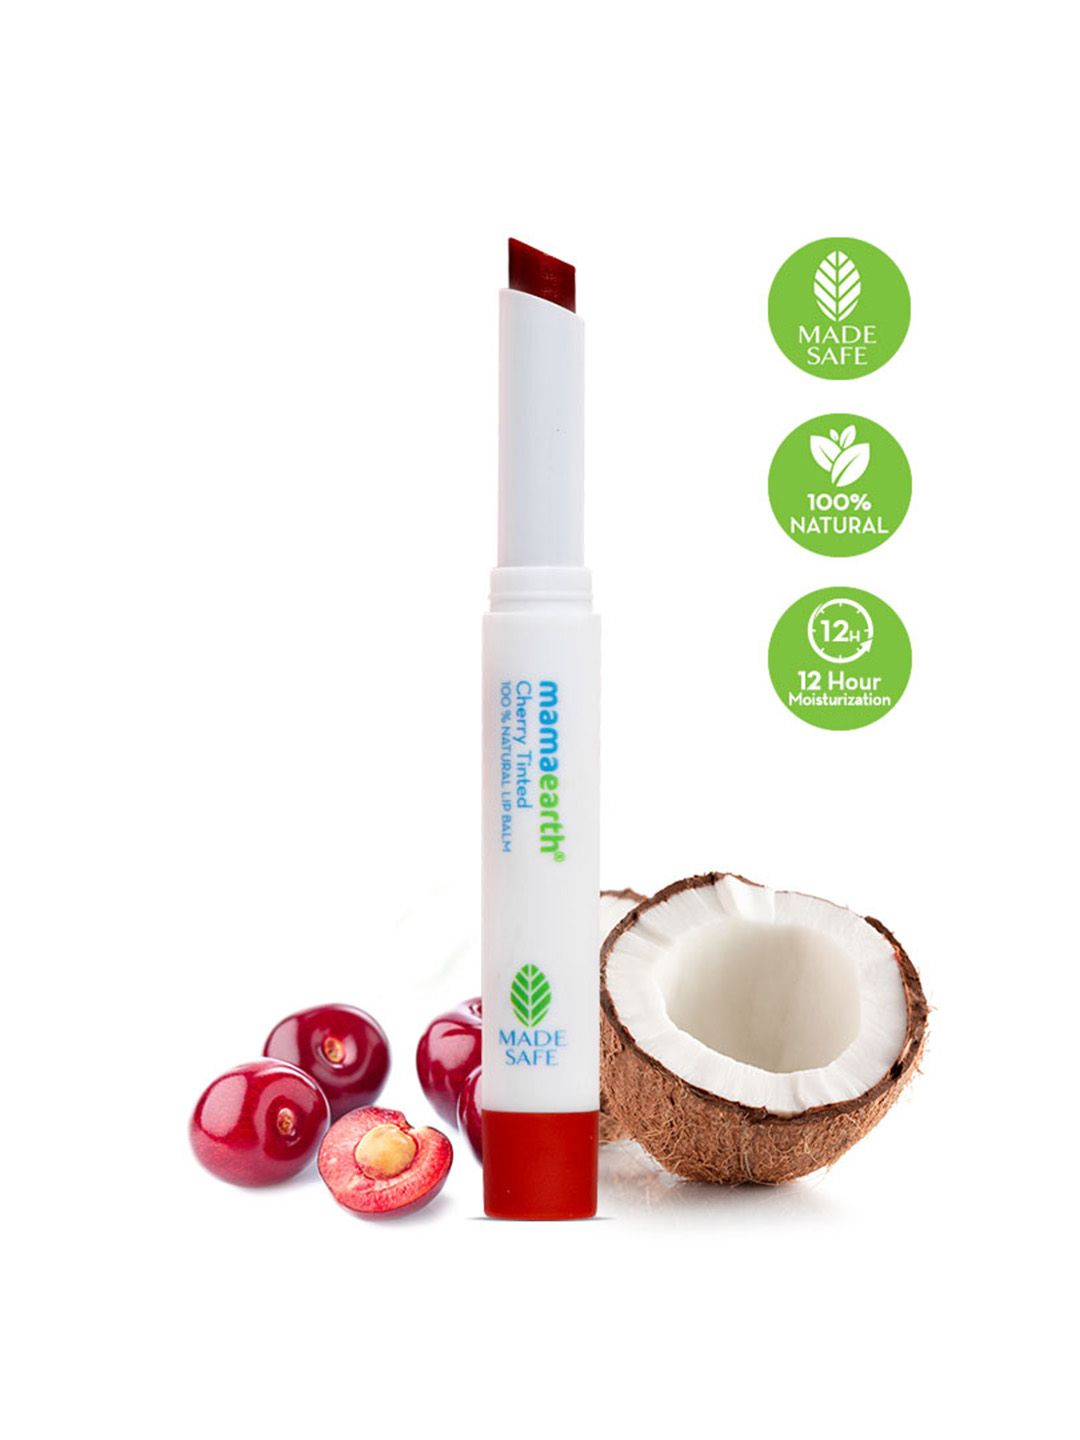 Mamaearth Cherry Tinted 100% Natural Lip Balm Price in India